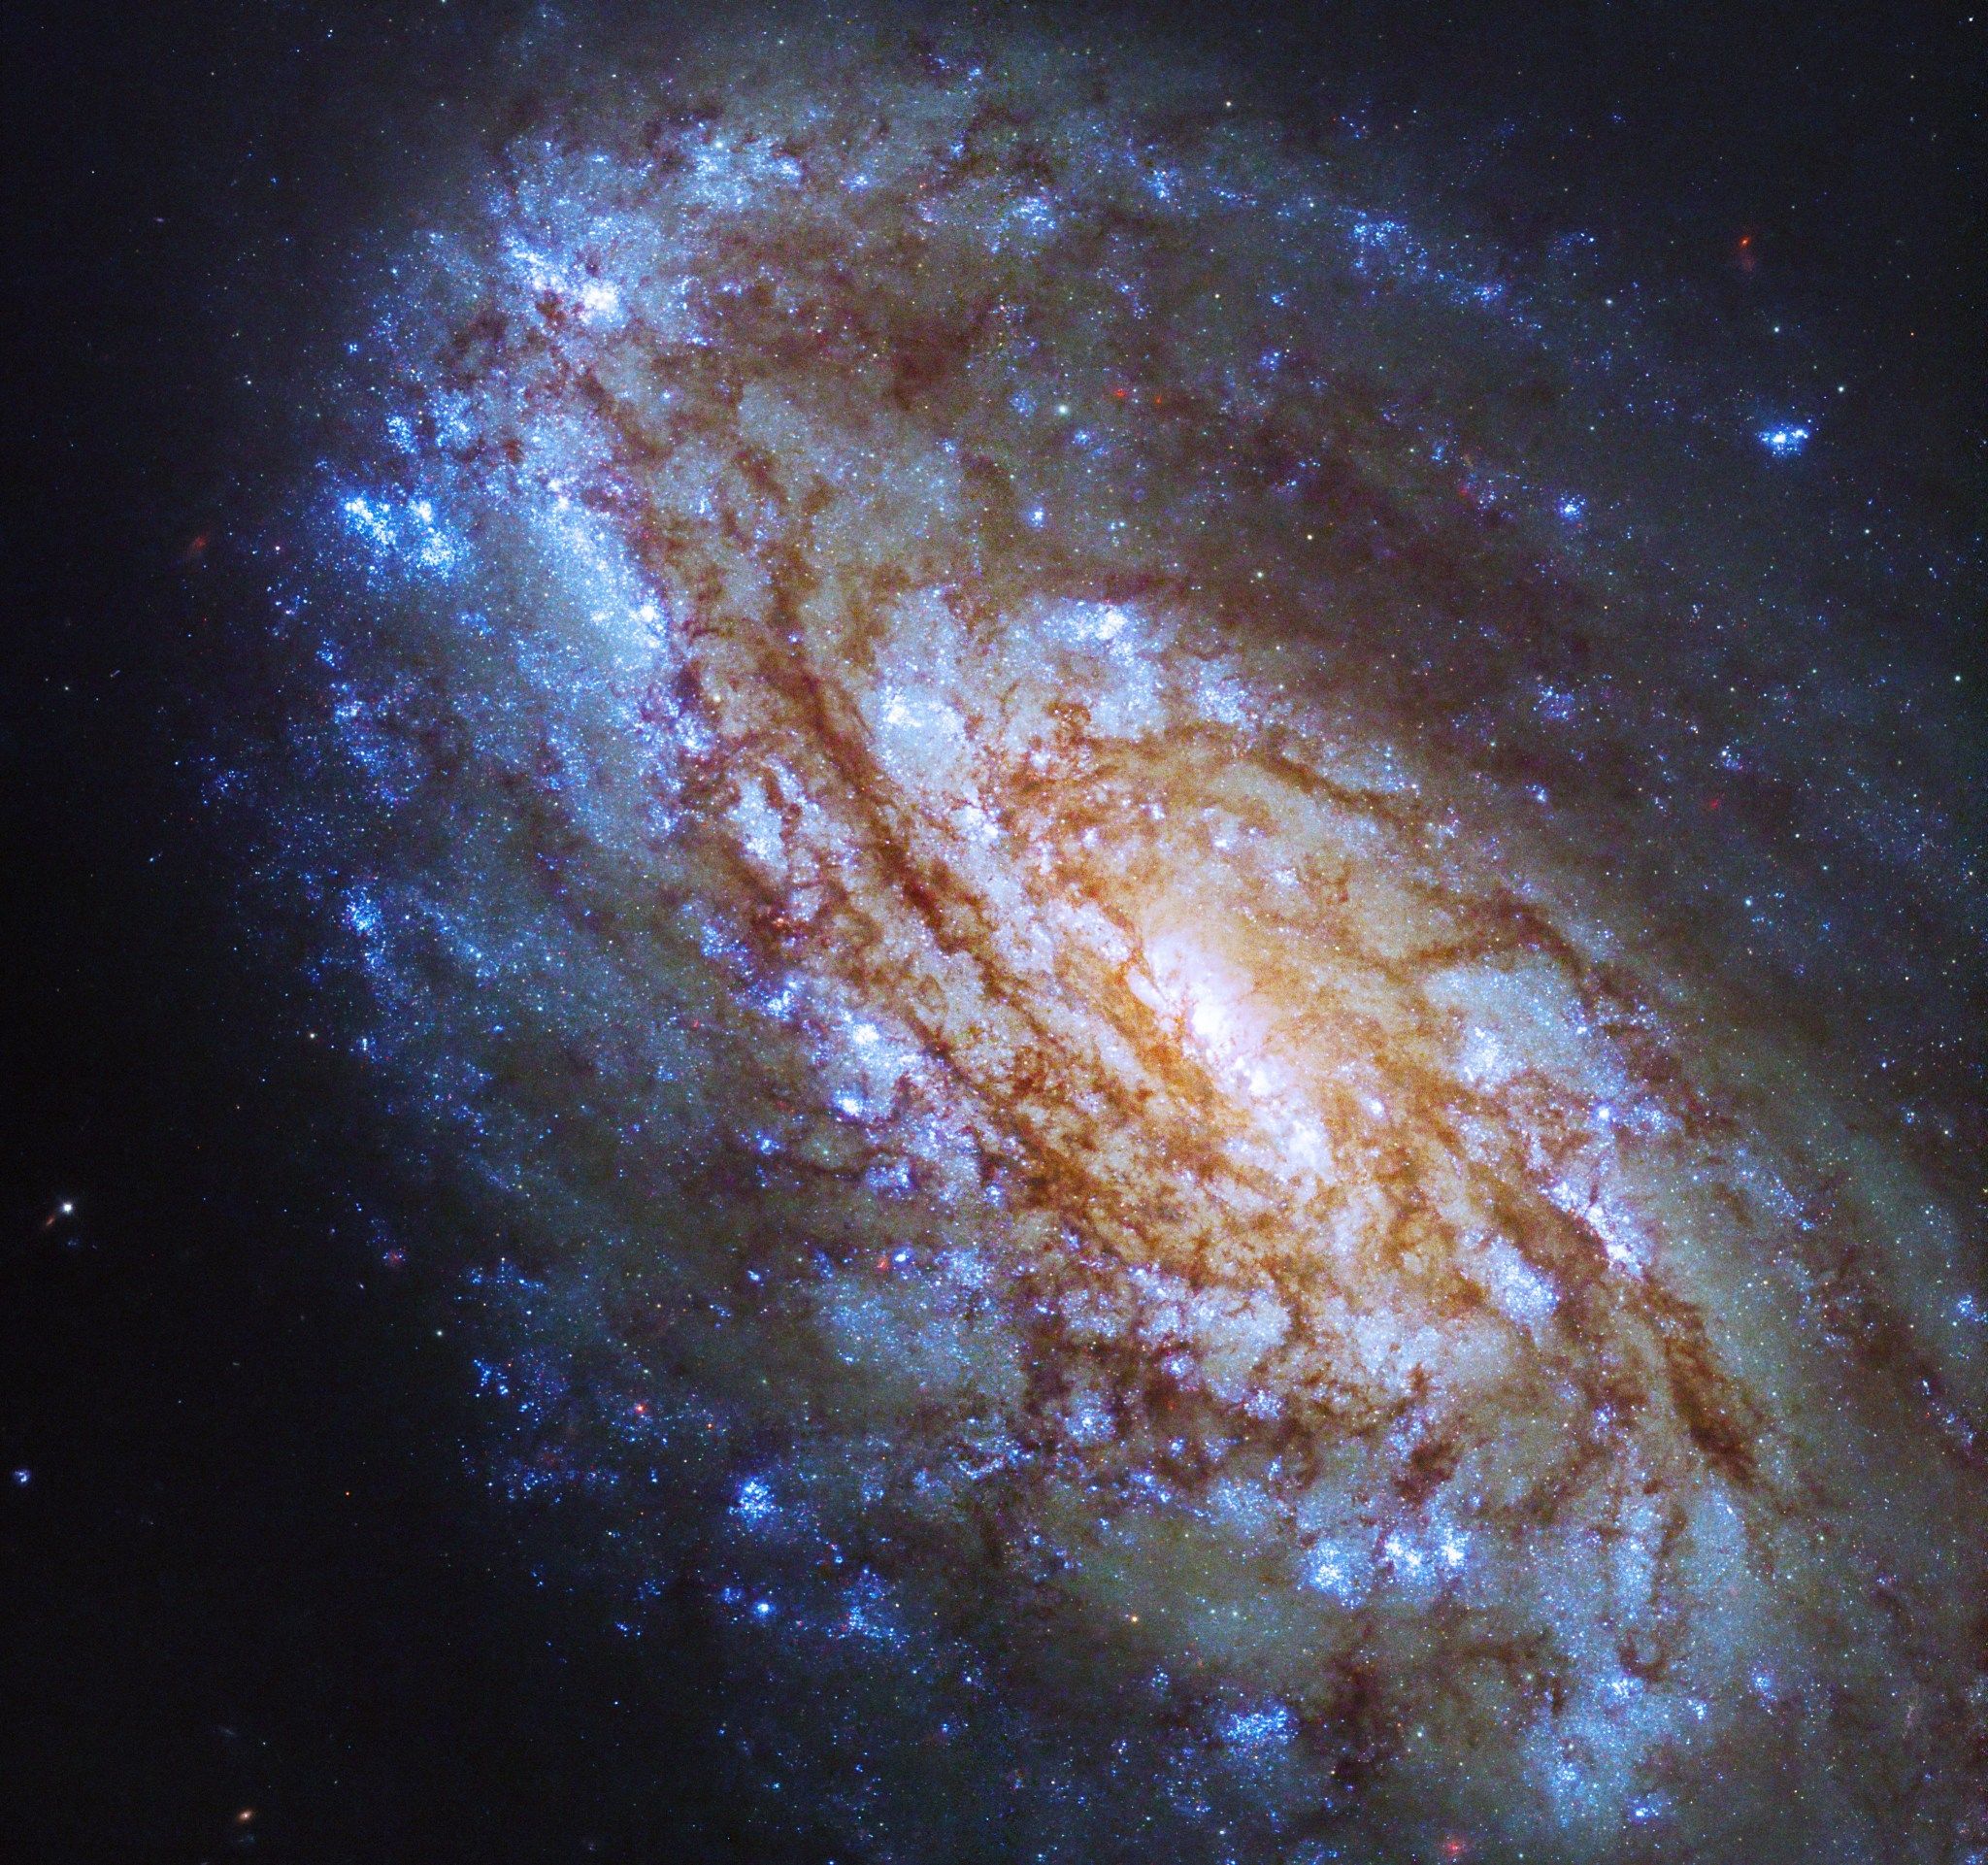 A bright spiral galaxy fills the frame from the lower-right to the upper-left. The galaxy is tilted toward us and holds bright blue-white stars and reddish-brown dust lanes that showcase its spiral nature.